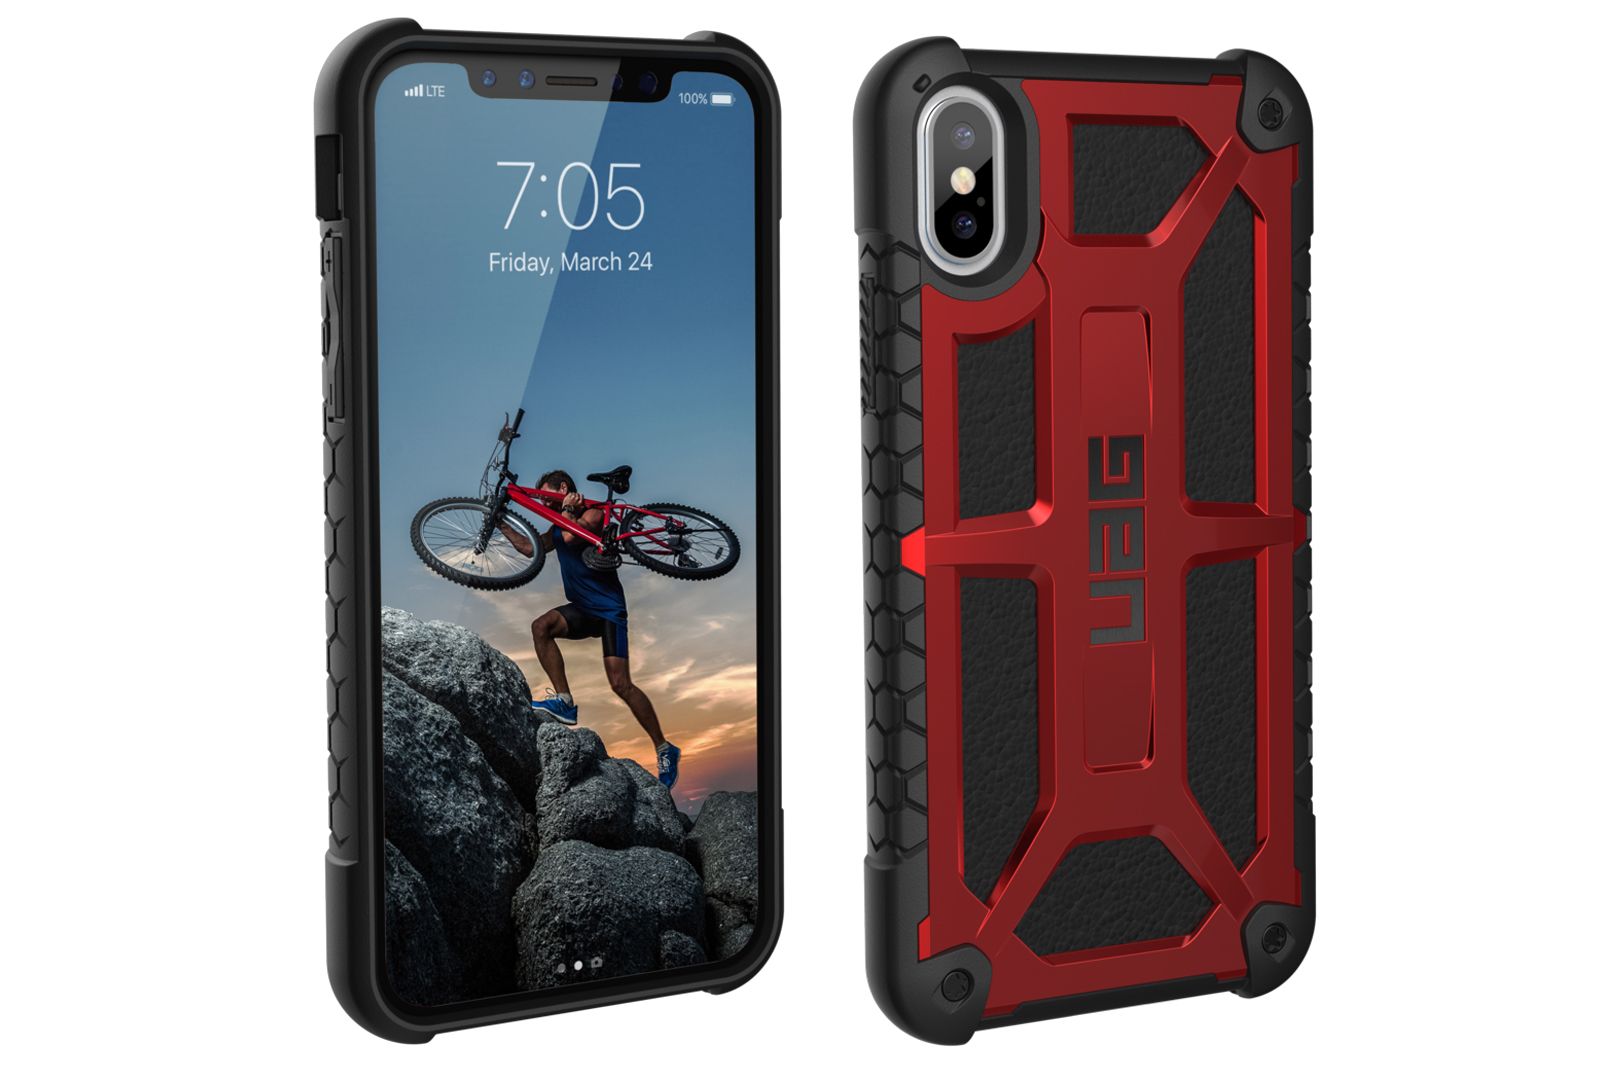 Best Iphone X Cases Protect Your New Apple Device image 17